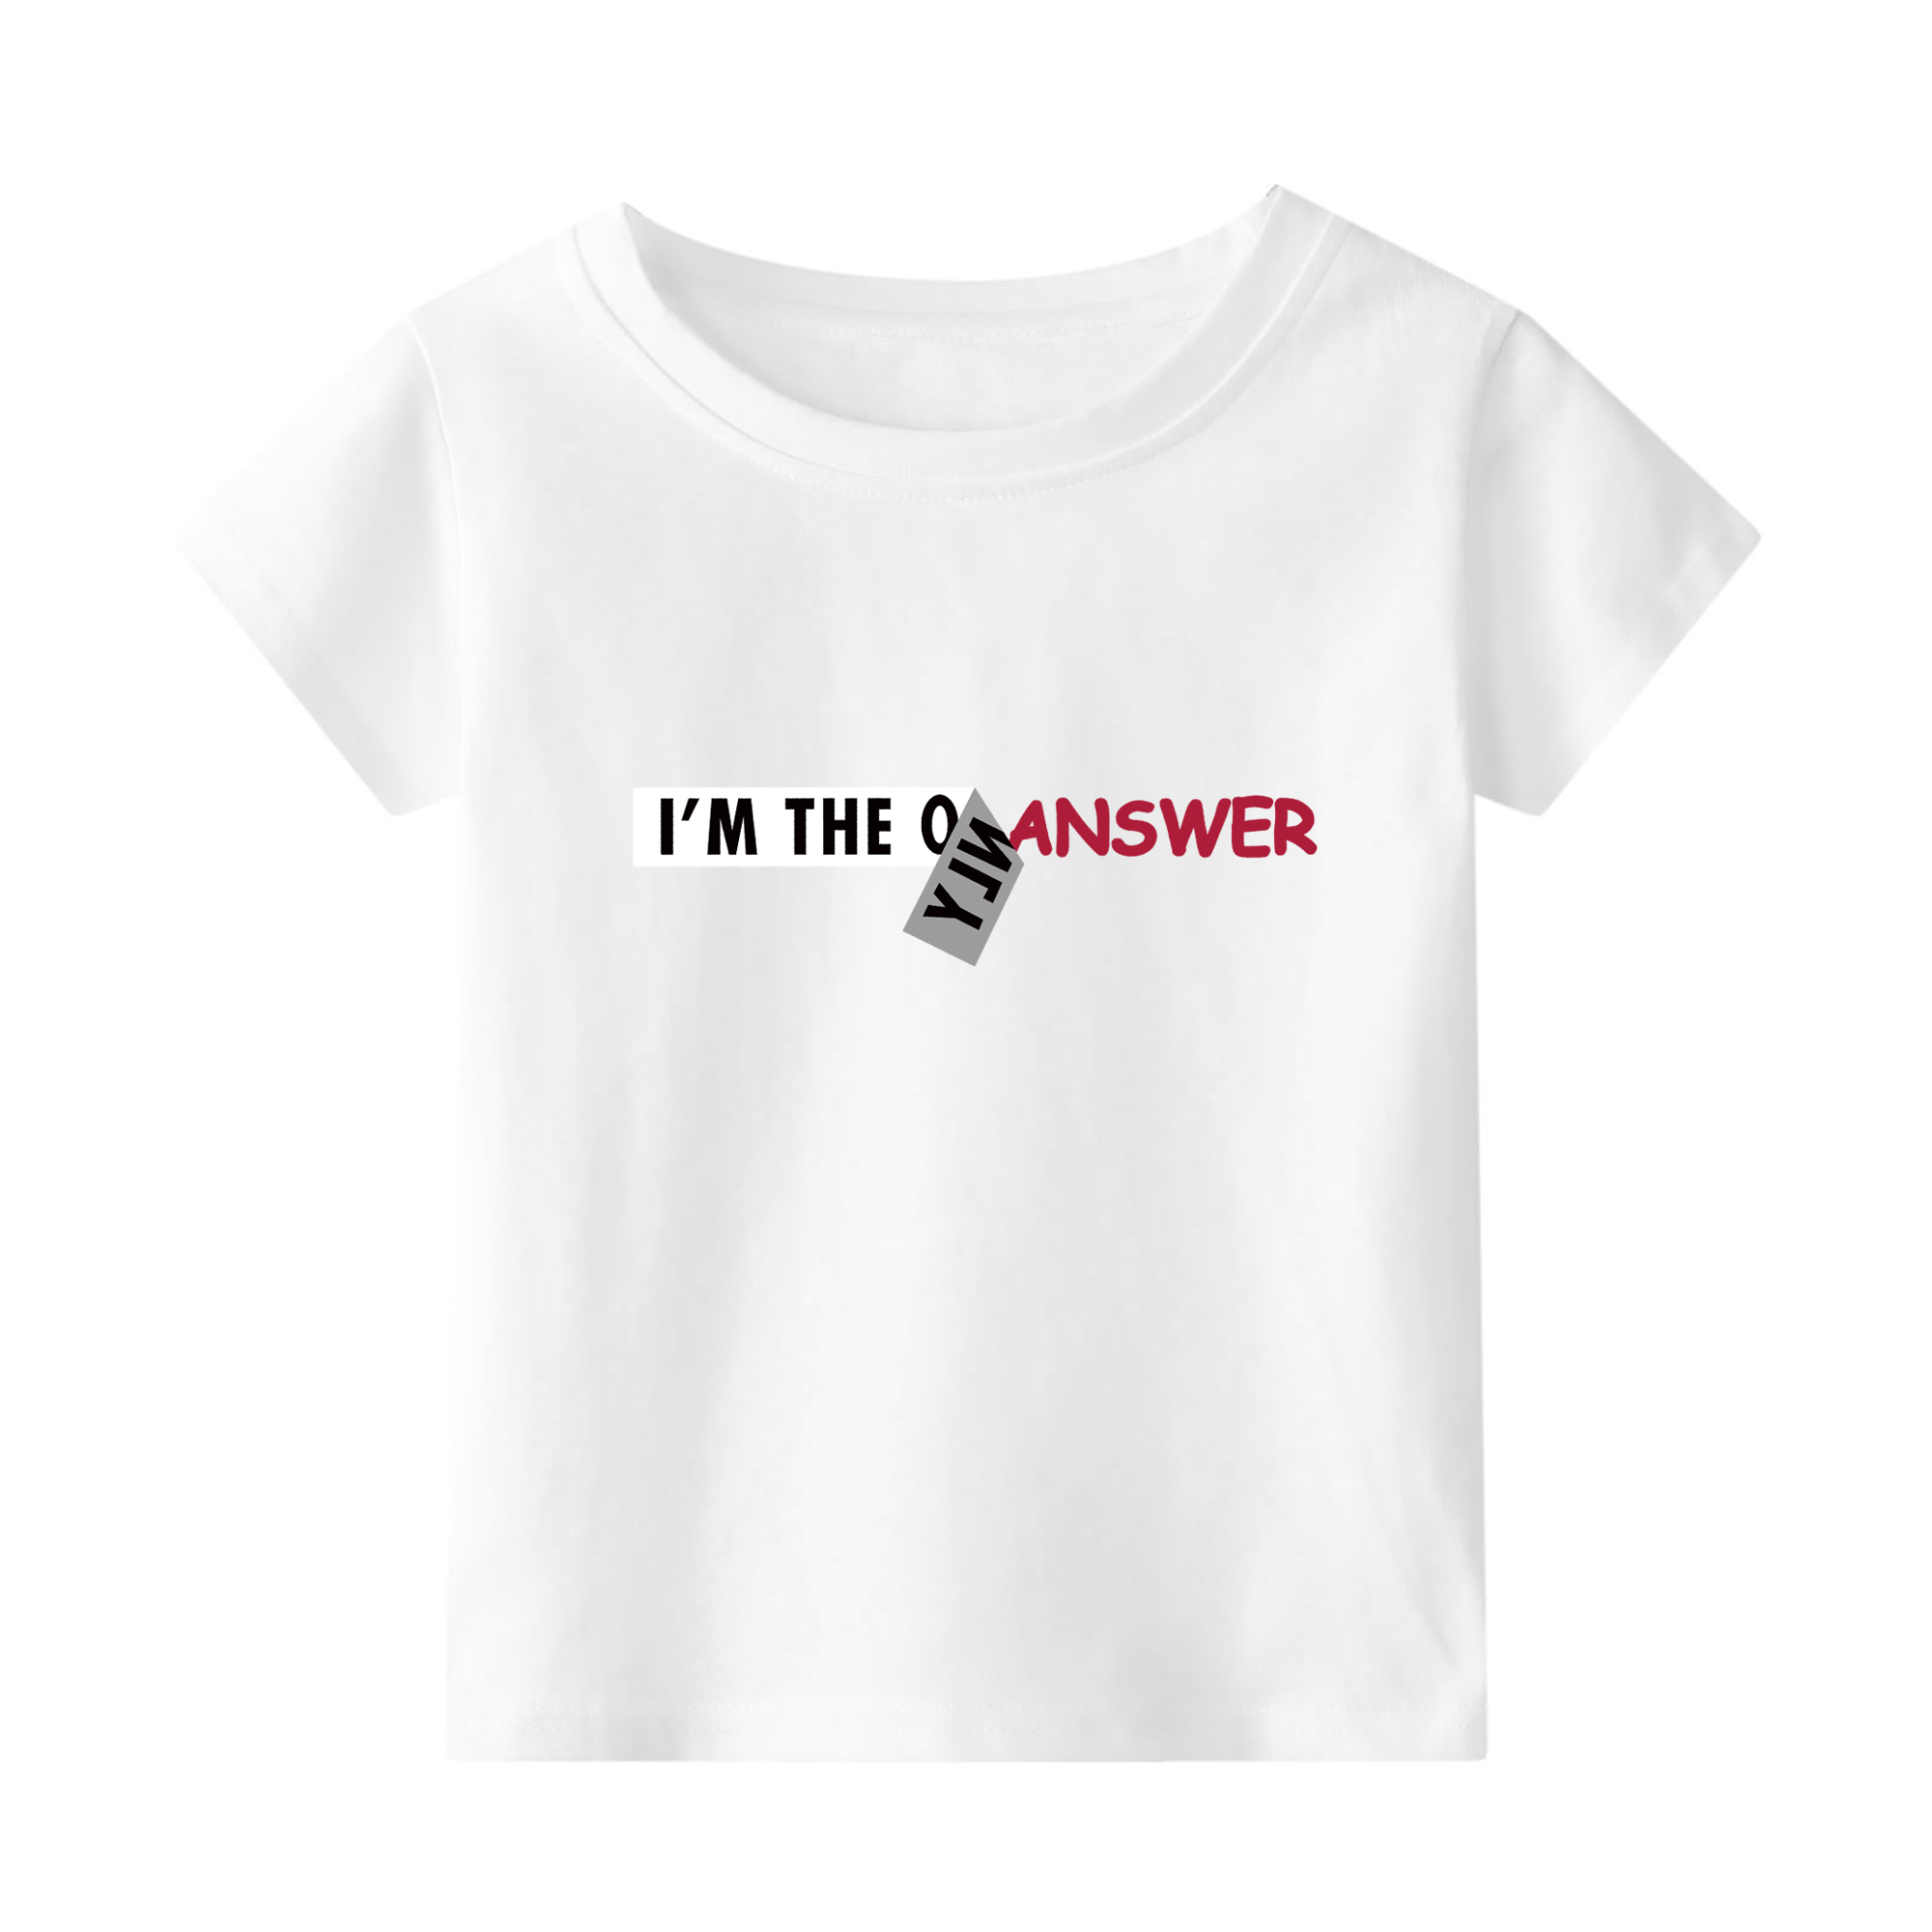 Fashionable I'M THE ONLY ANSWER Print Tee